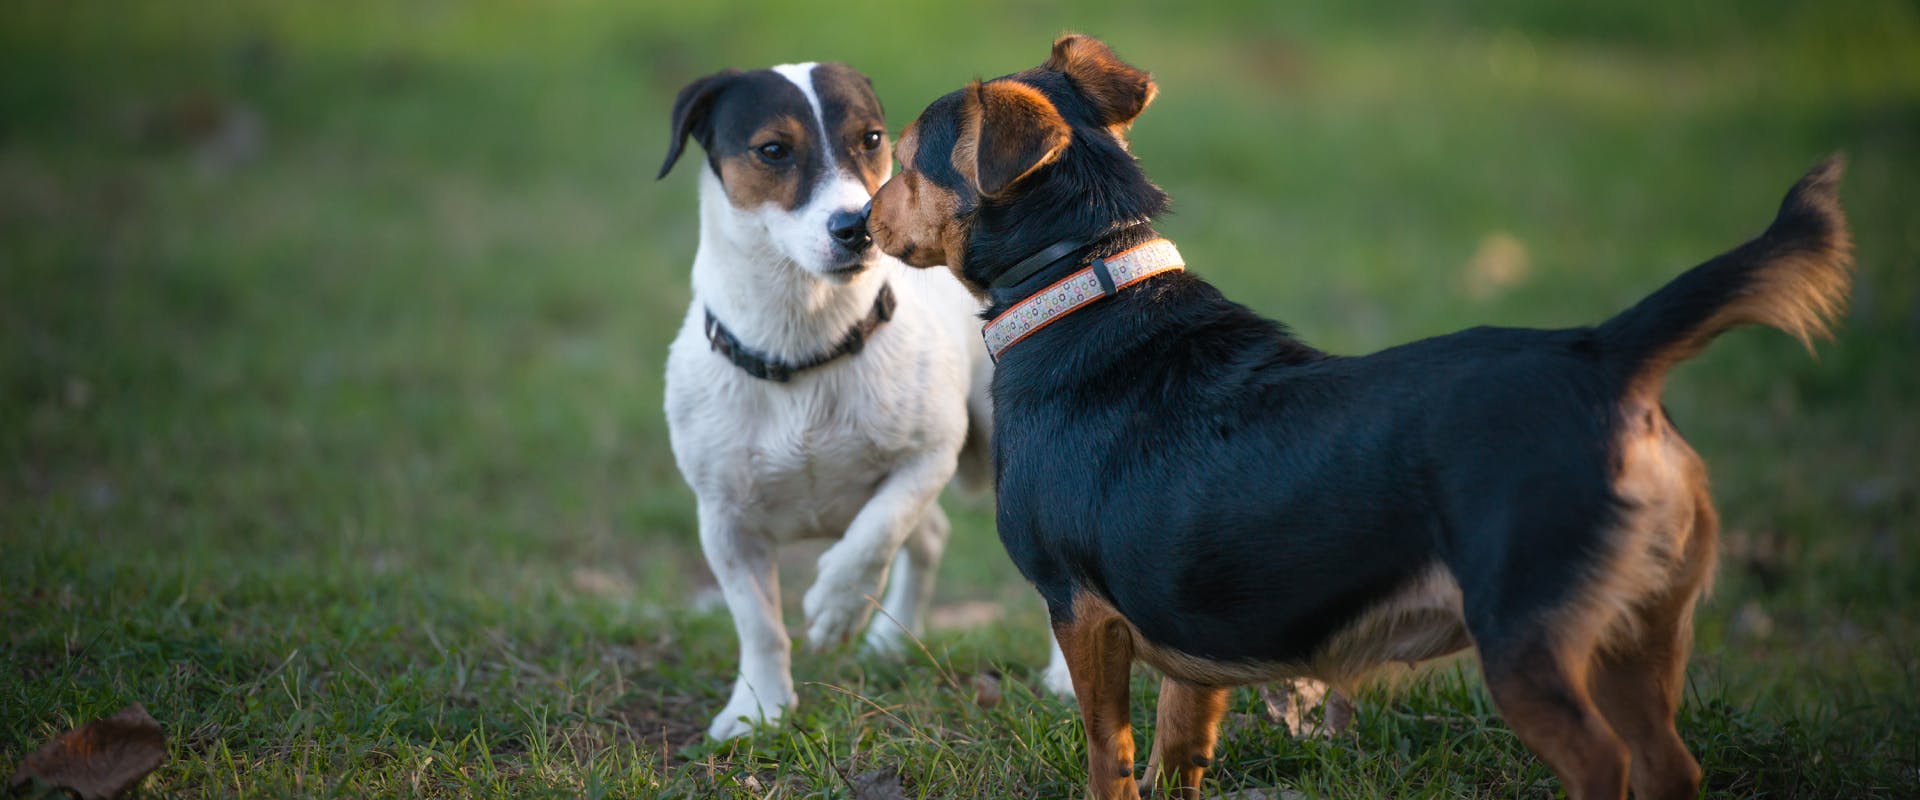 Two dogs sniff each other's noses in a park.